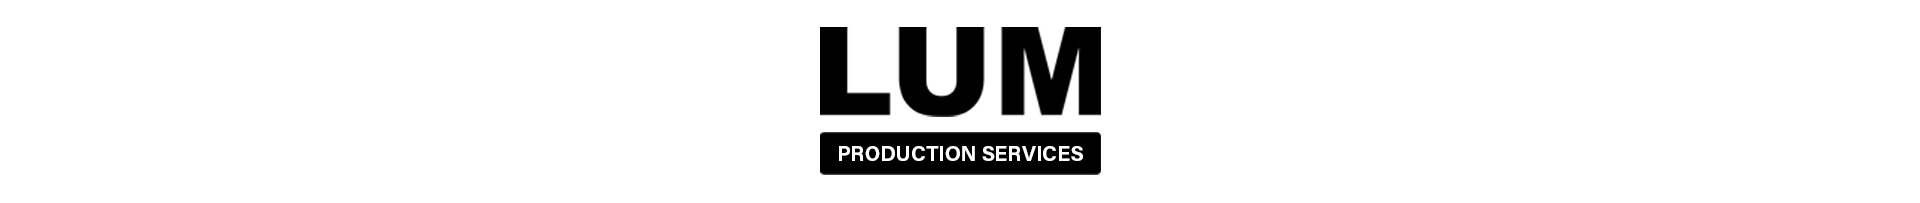 Header_LUMProductionServices